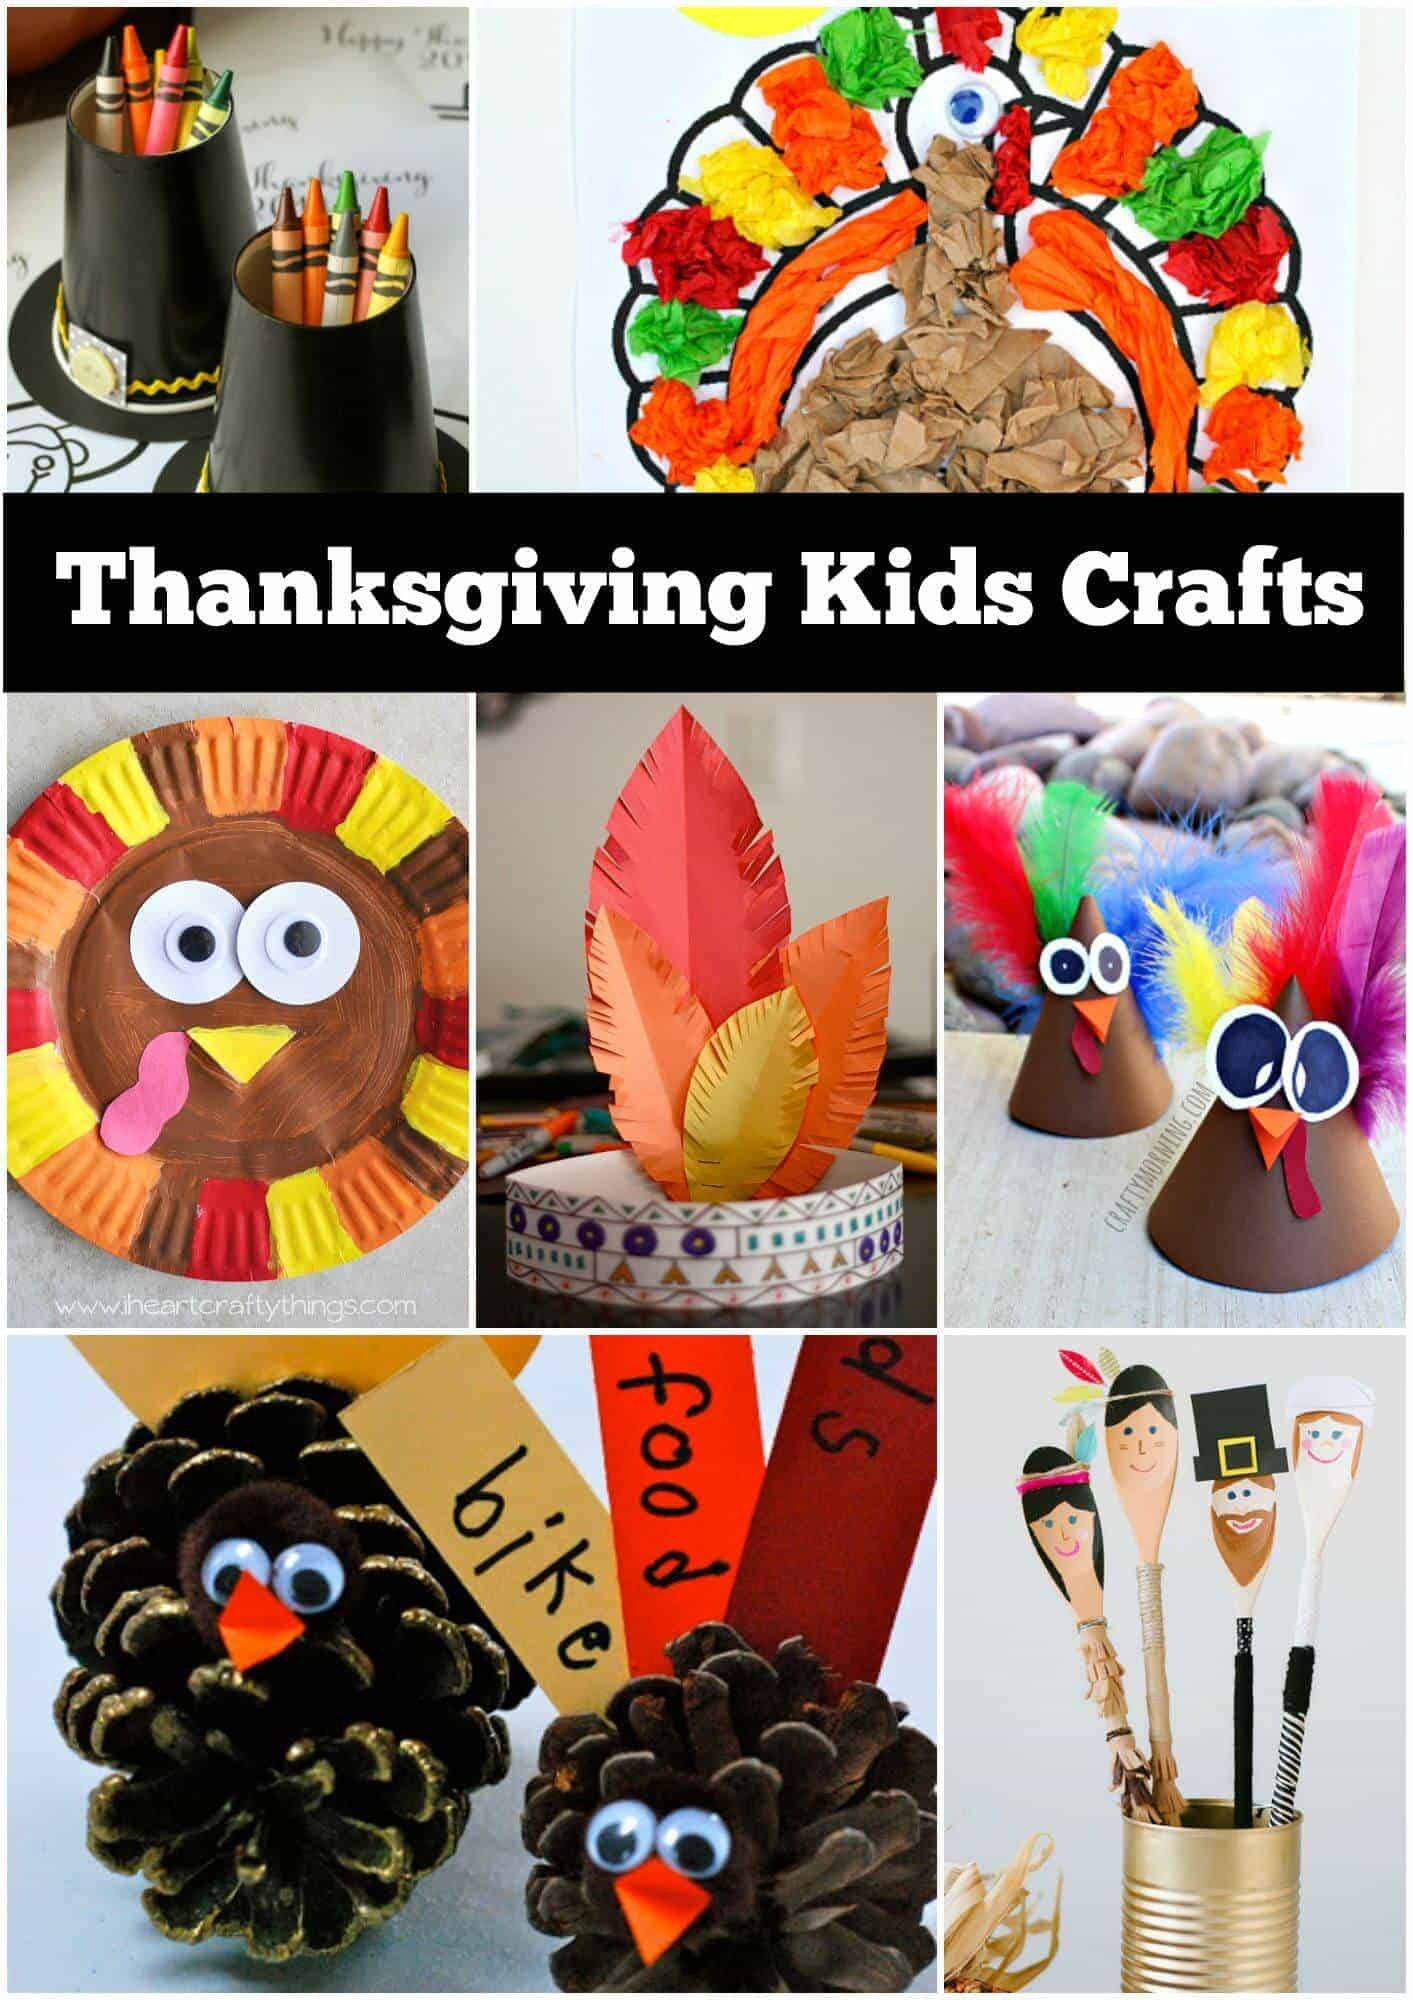 Thanksgiving Turkey Craft
 12 Thanksgiving Craft Ideas for kids Page 2 of 2